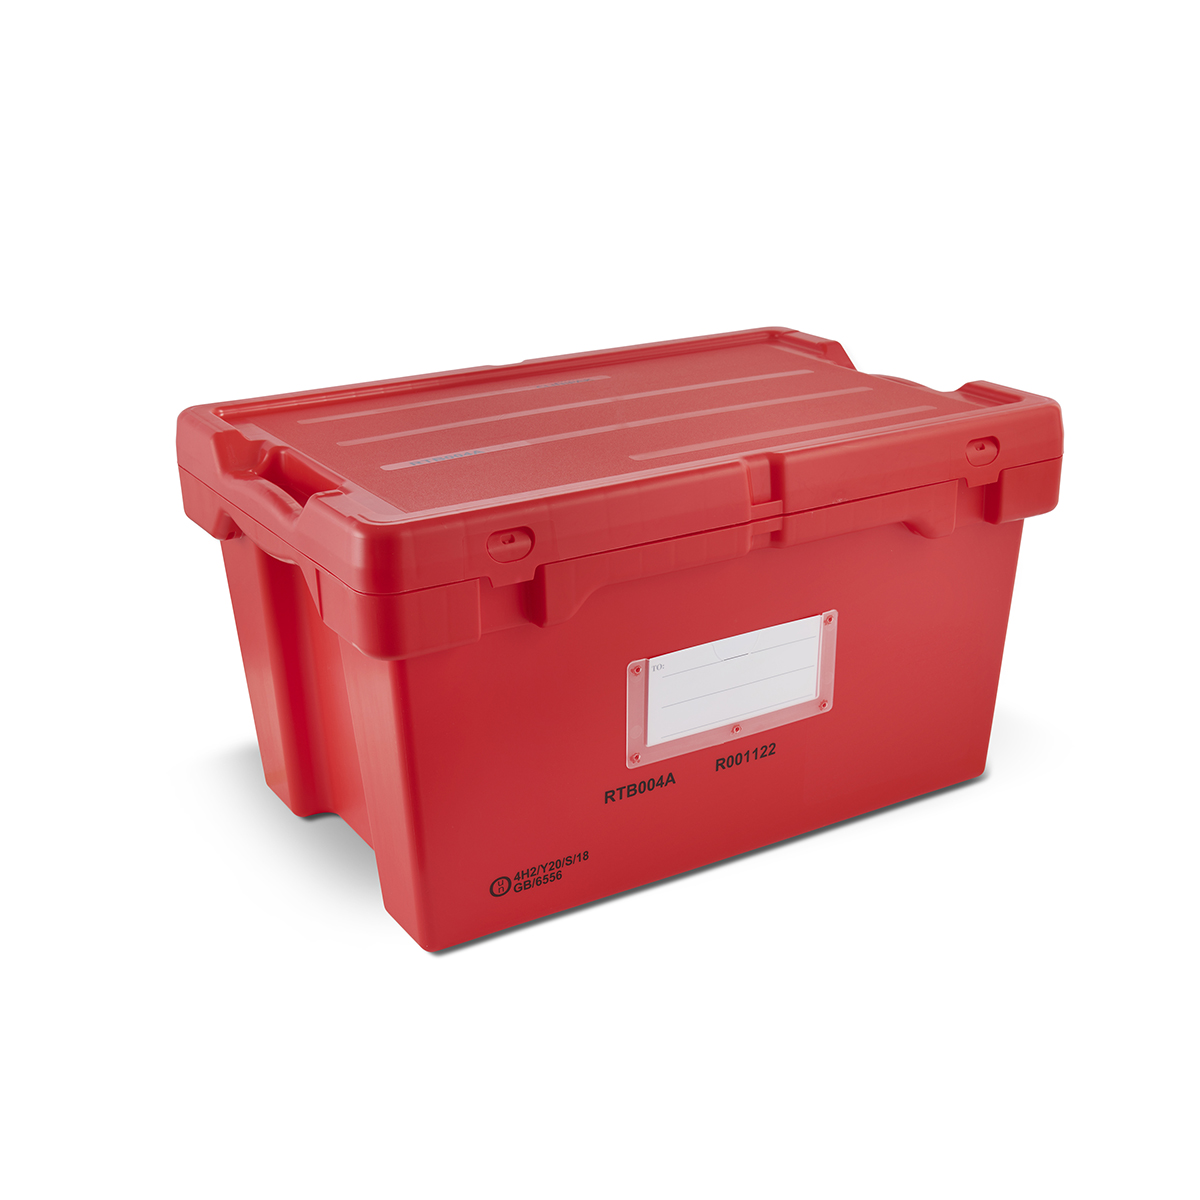 Red Transport Boxes Image